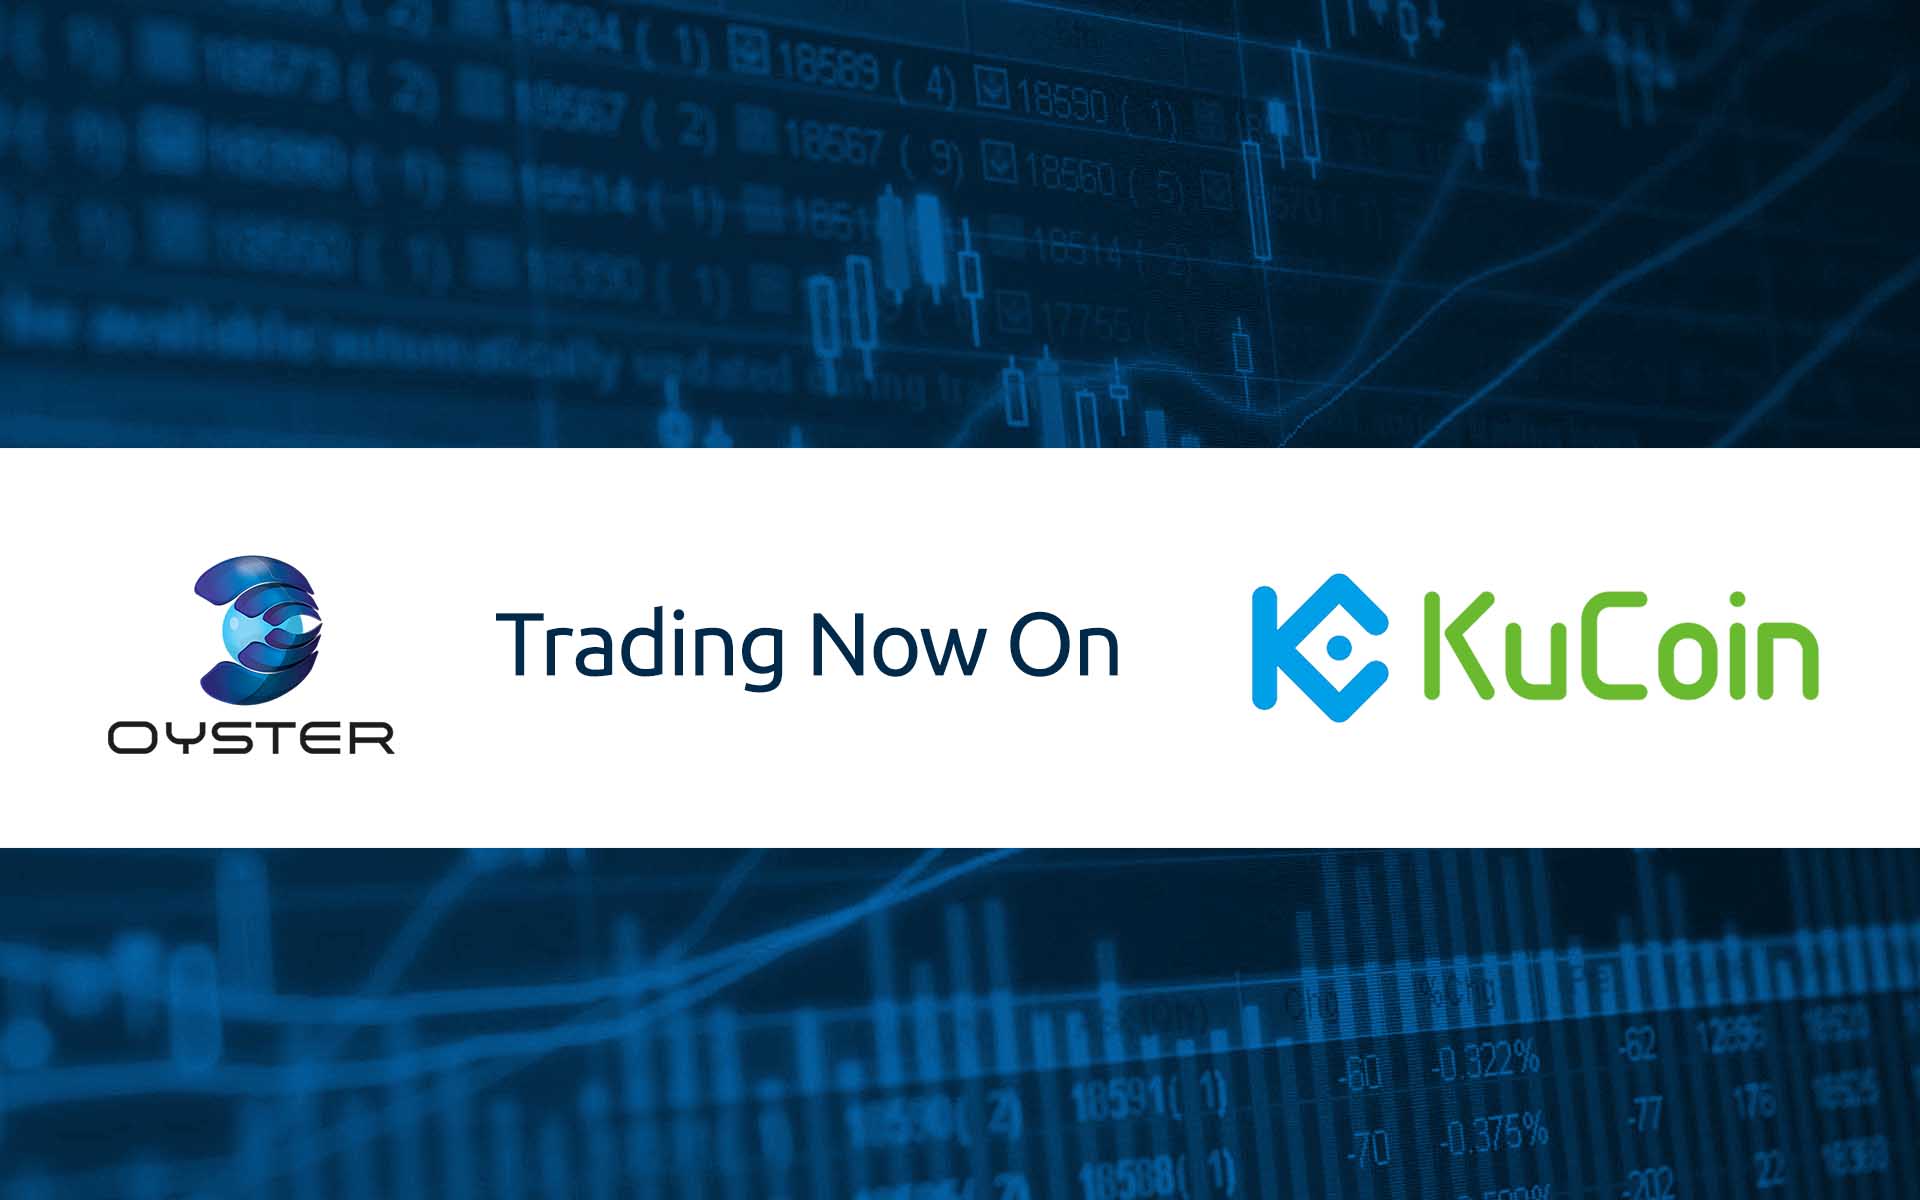 Oyster Pearl Listed On KuCoin: Trading in Progress Now